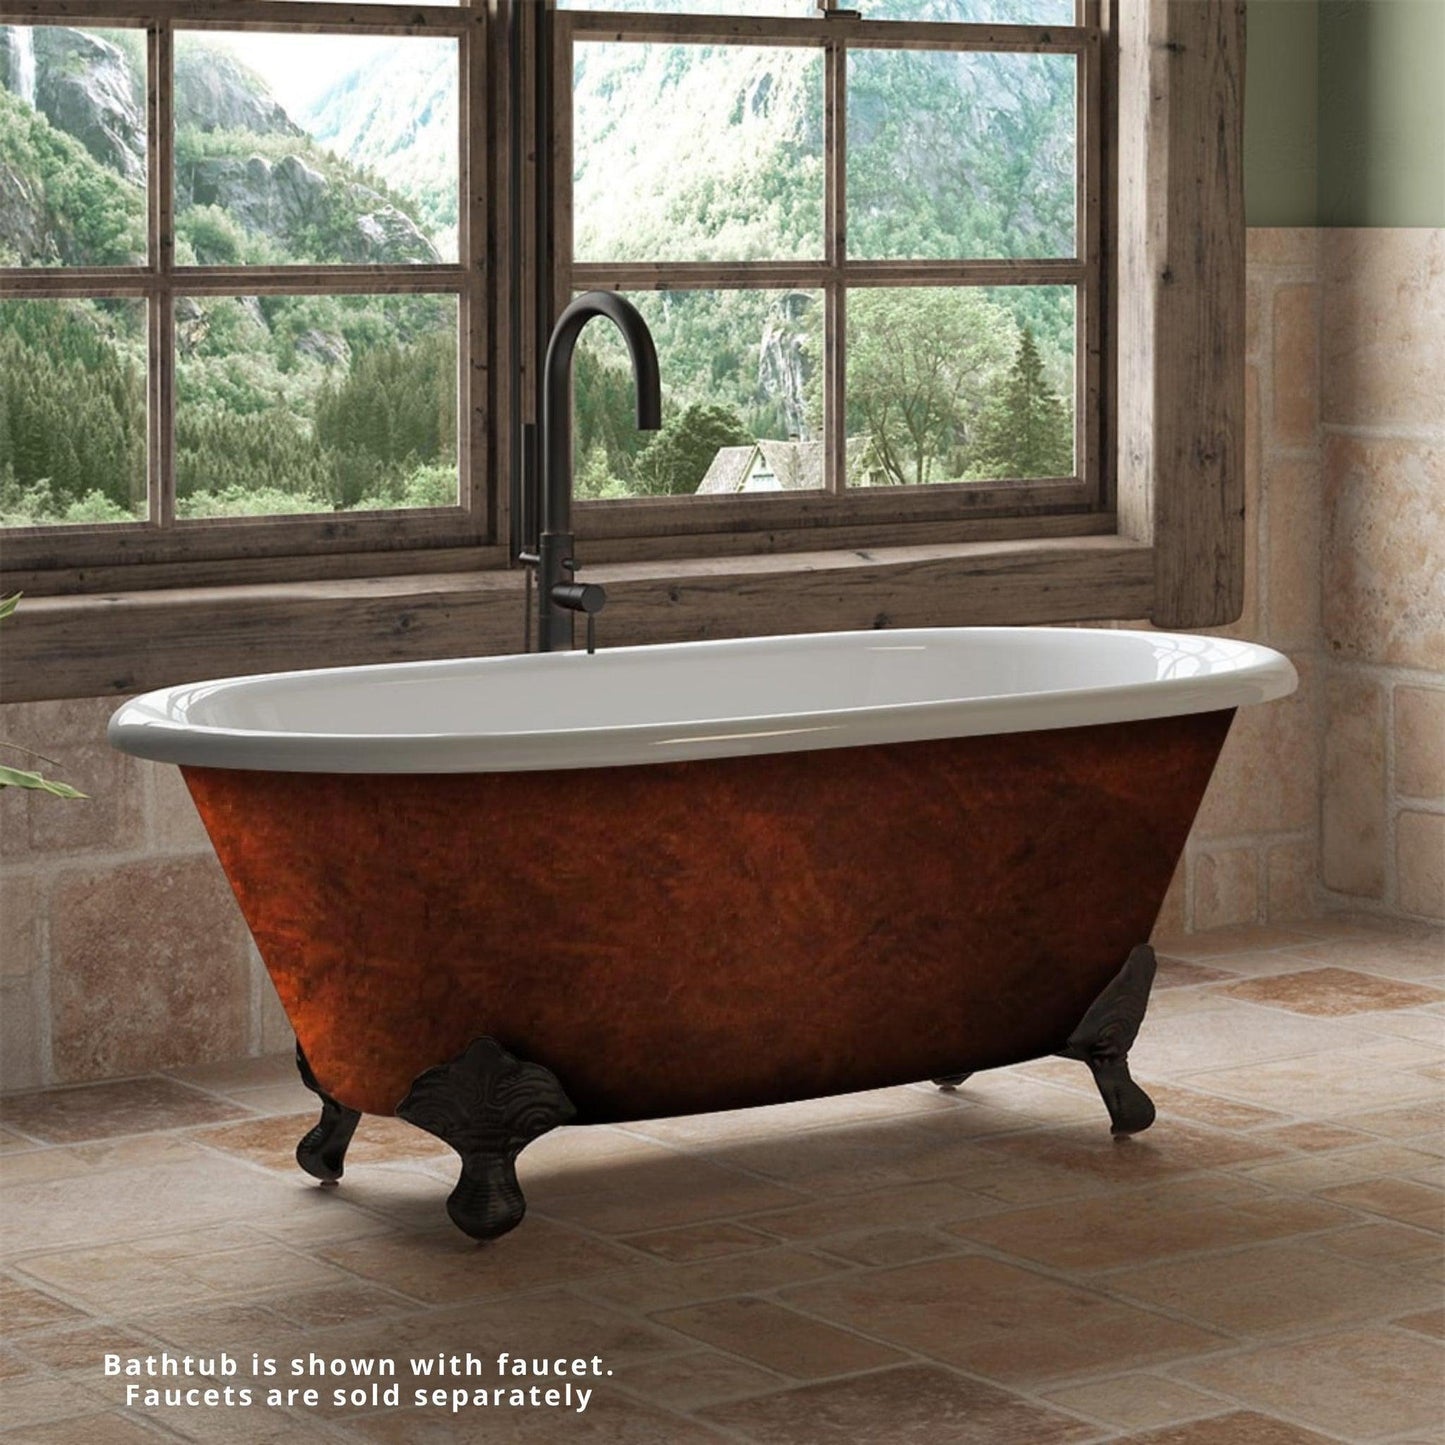 Cambridge Plumbing 60" Hand Painted Copper Bronze Cast Iron Double Ended Copper Bronze Bathtub With No Faucet Holes With Oil Rubbed Bronze Feet